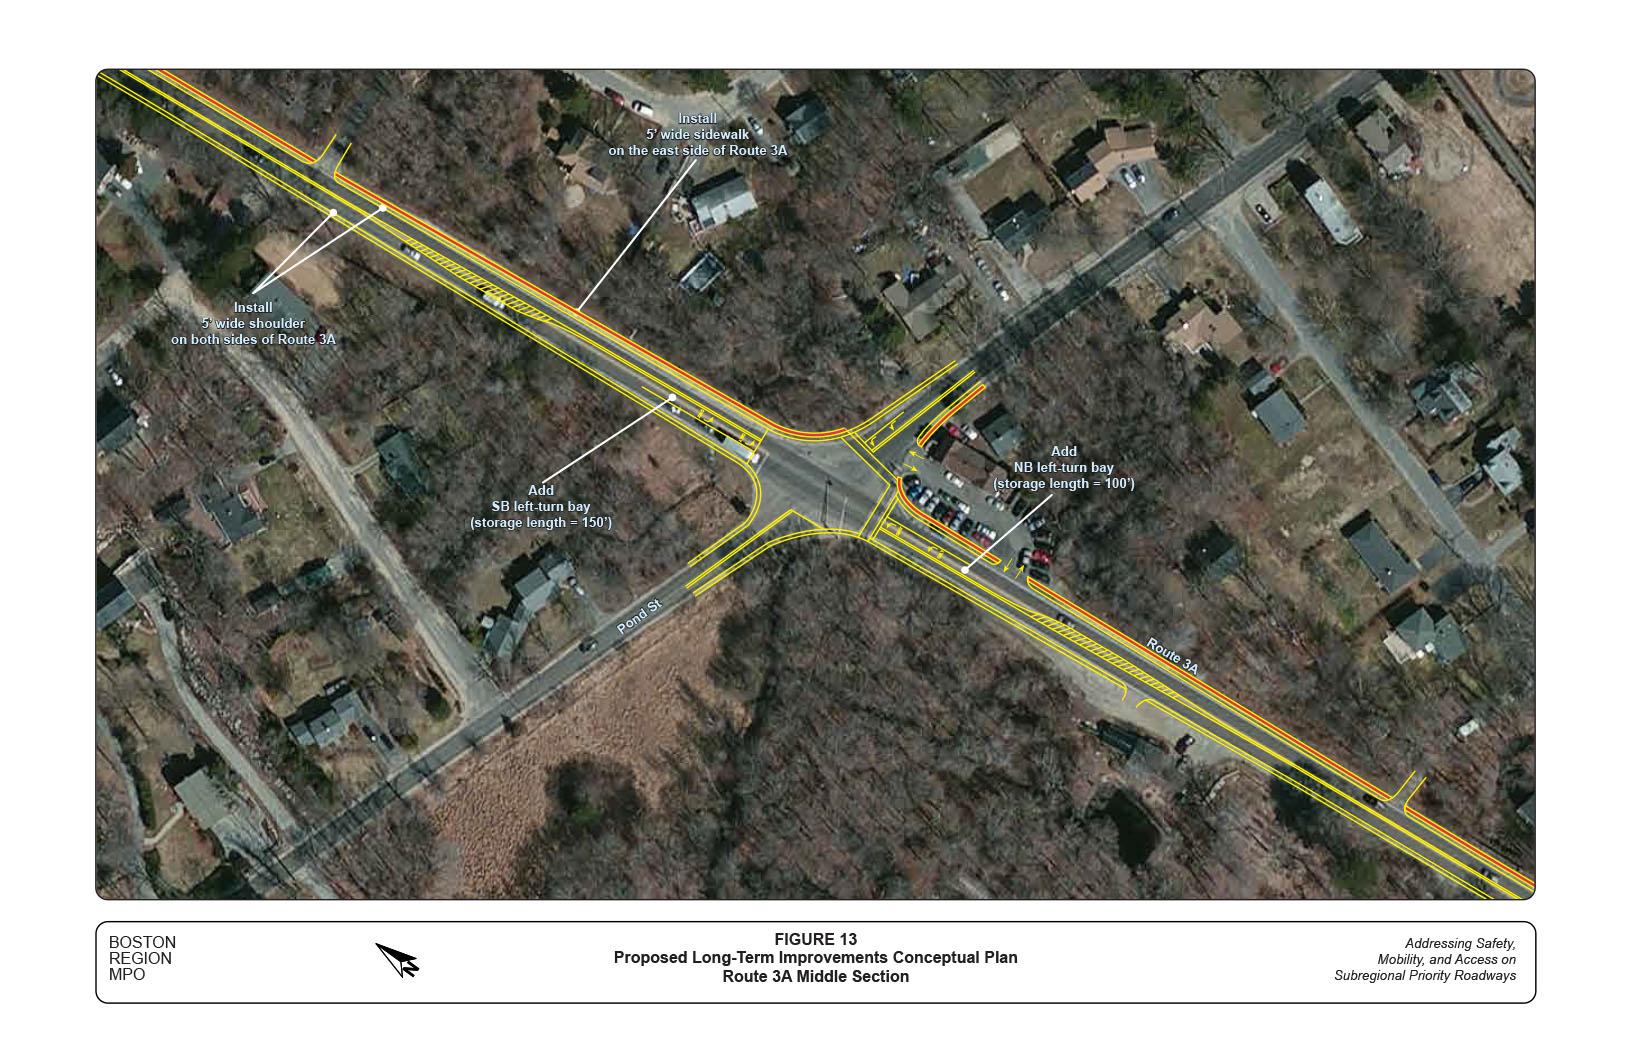 Figure 13 is an aerial view map that depicts the conceptual plan for the proposed long-term improvements in the vicinity of the intersection of Route 3A at Pond Street.